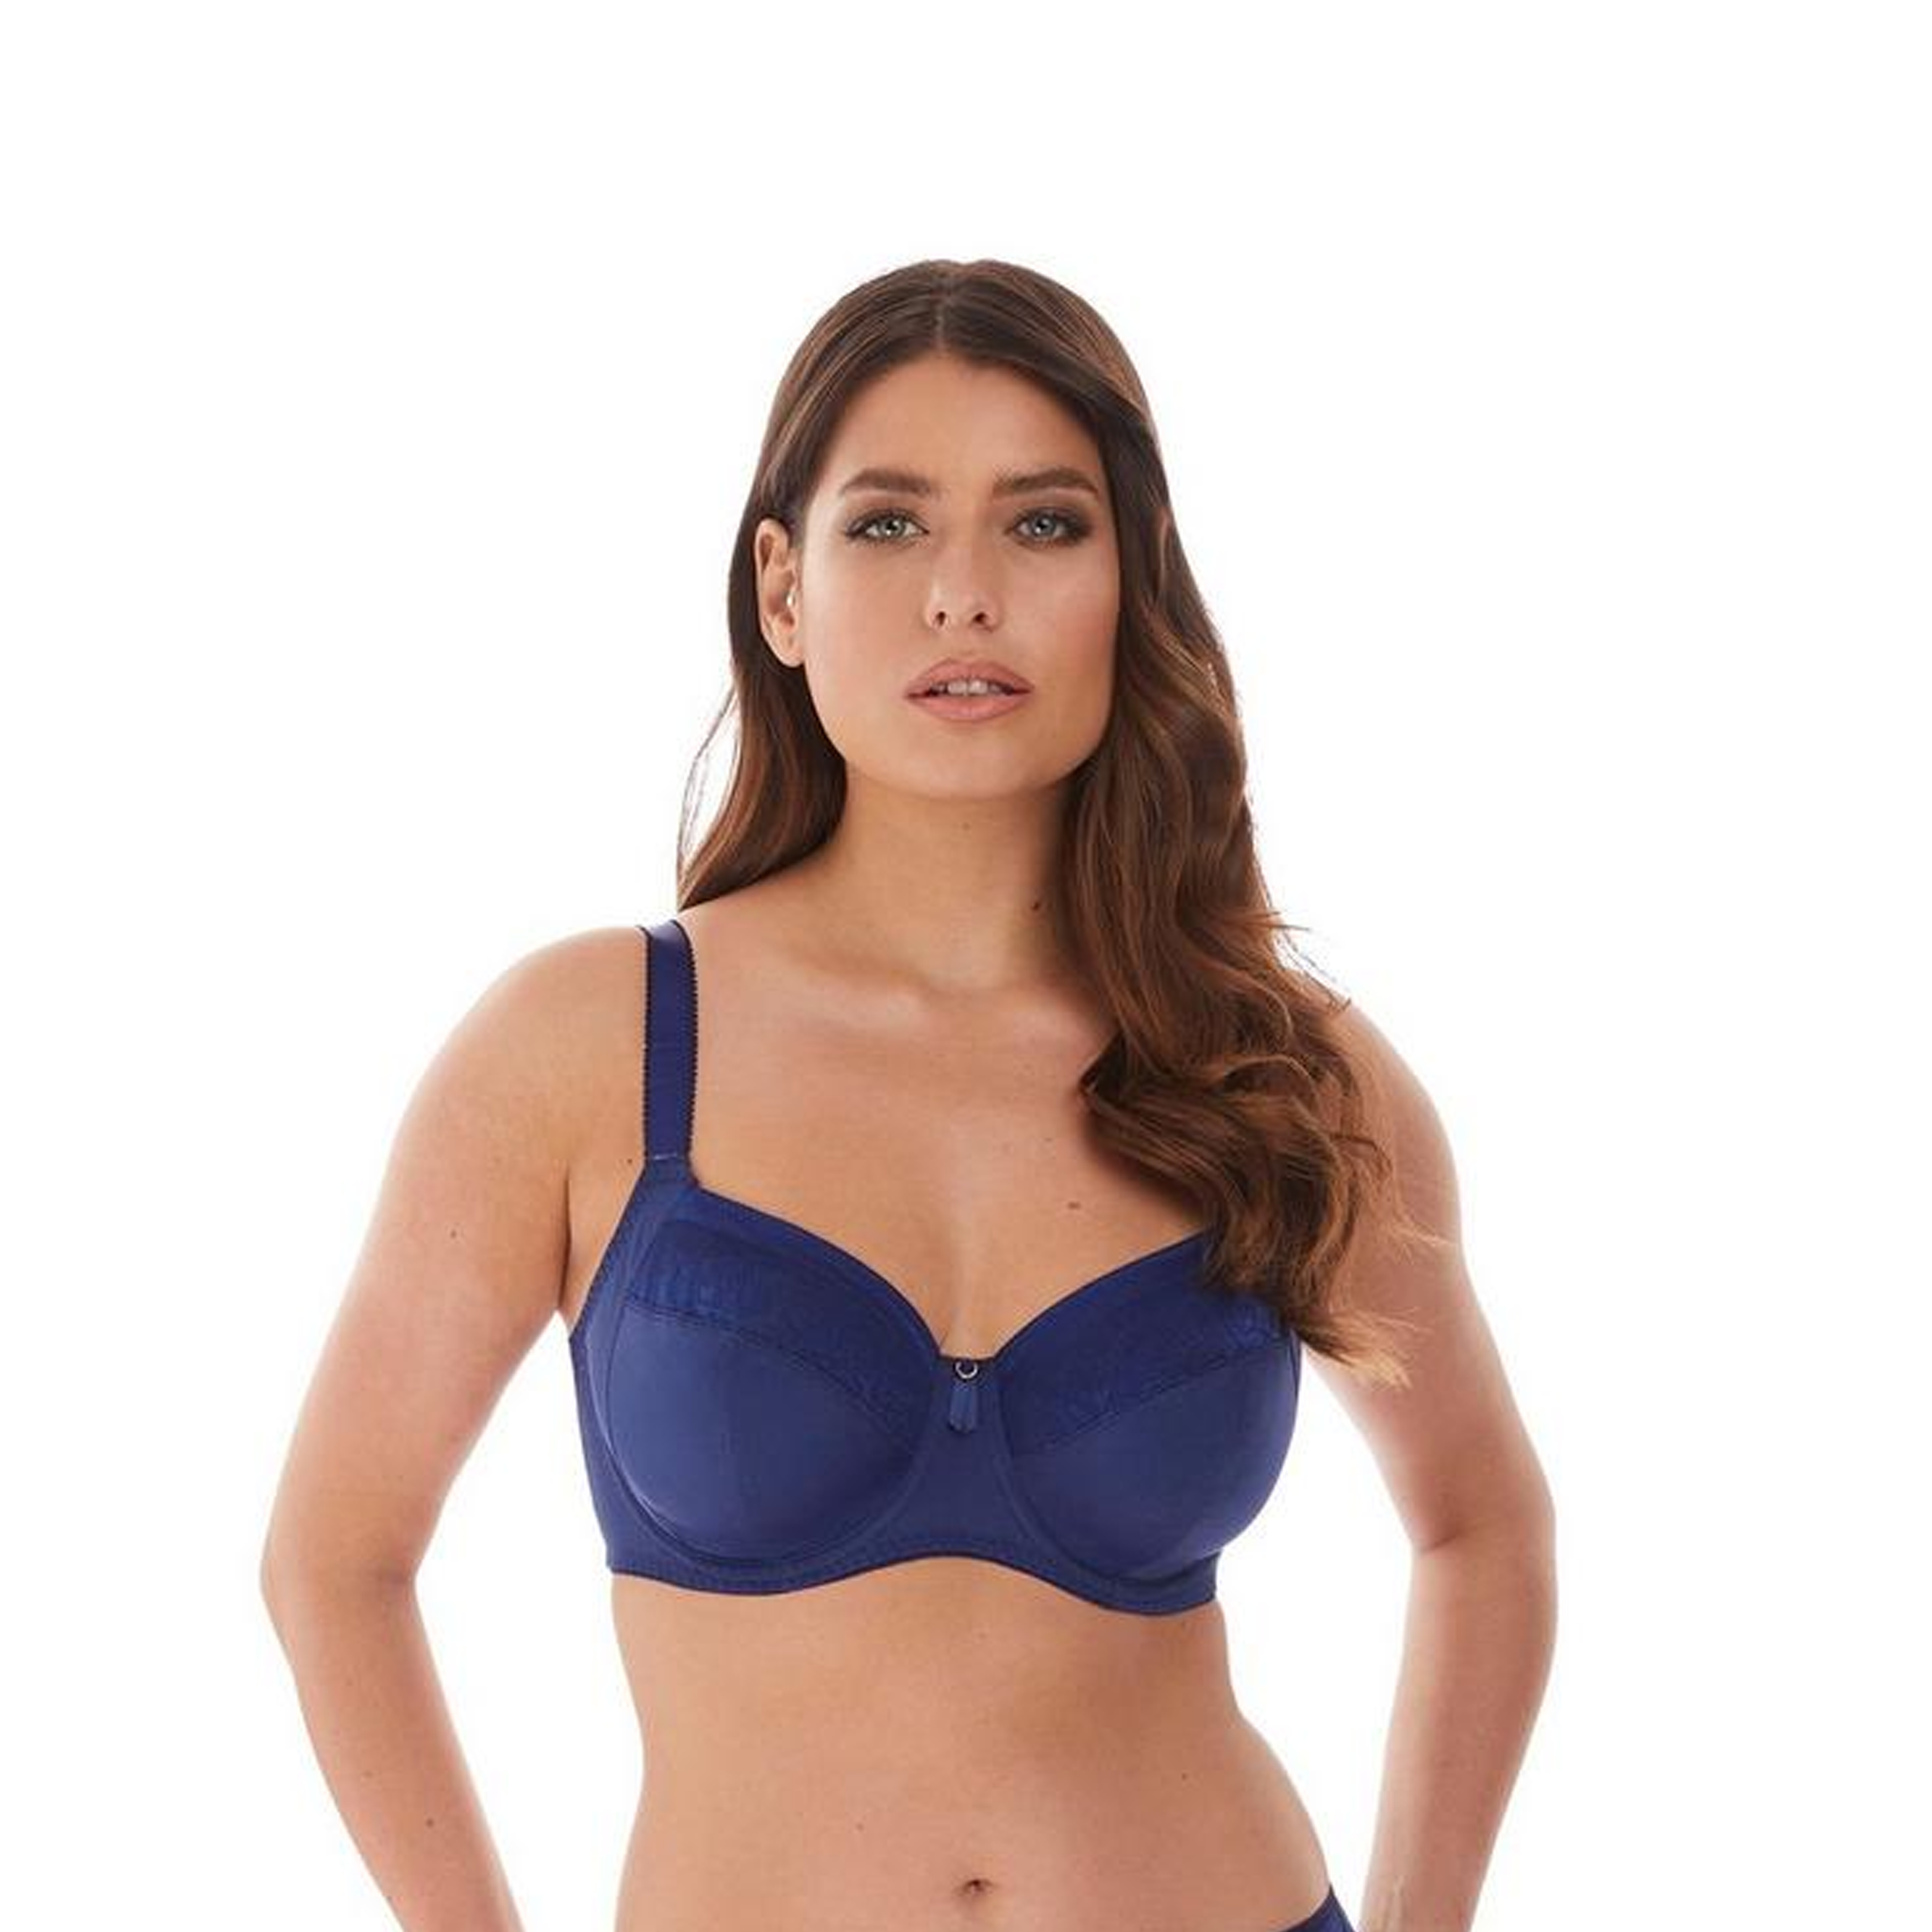 Illusion Navy Side Support bra by Fantasie – Ordinarily Active